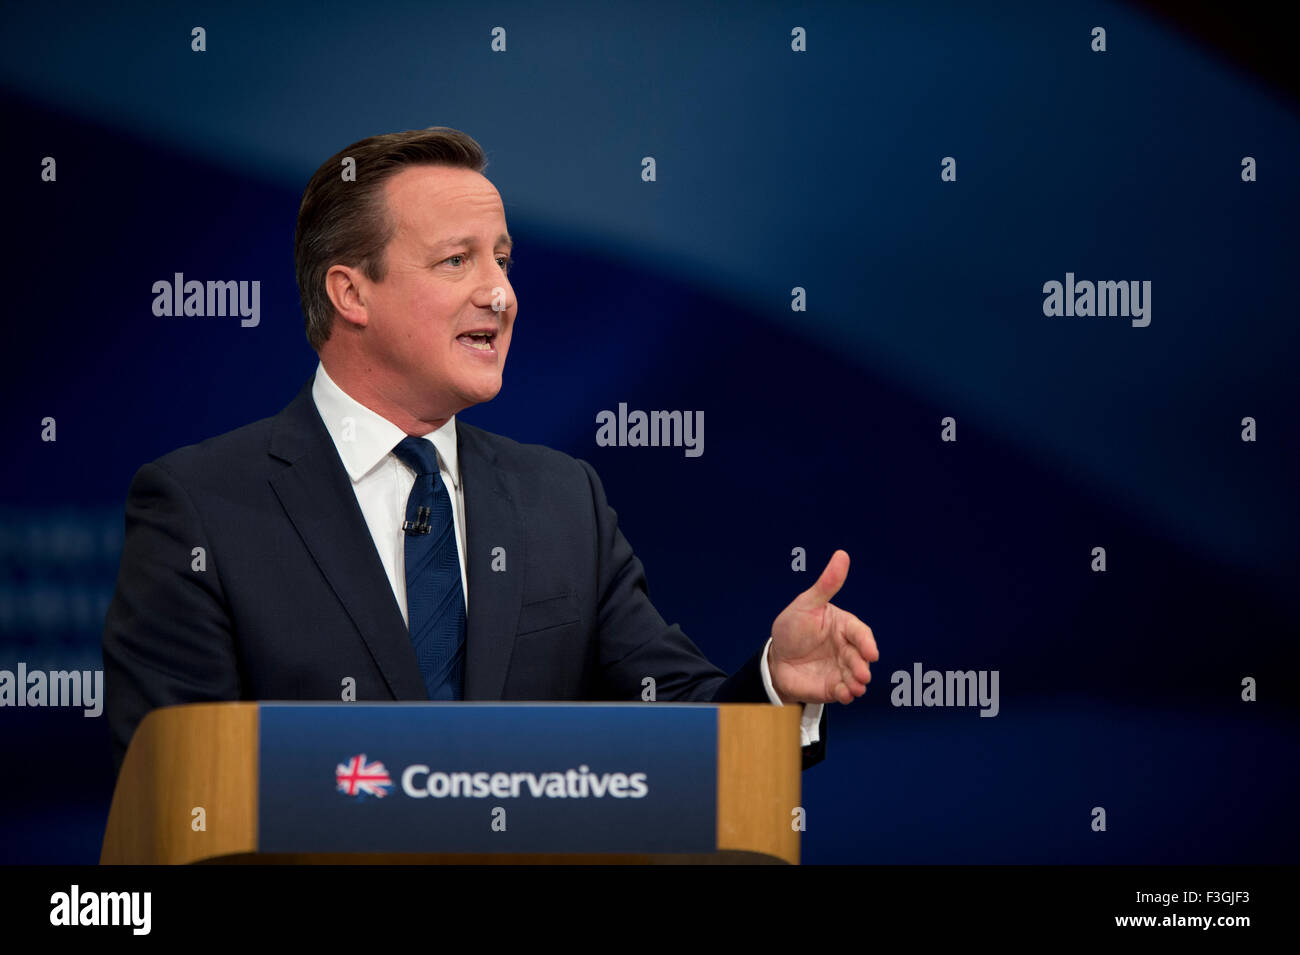 Manchester, UK. 7th October 2015. British Prime Minister David Cameron speaks at Day 4 of the 2015 Conservative Party Conference in Manchester. Credit:  Russell Hart/Alamy Live News. Stock Photo